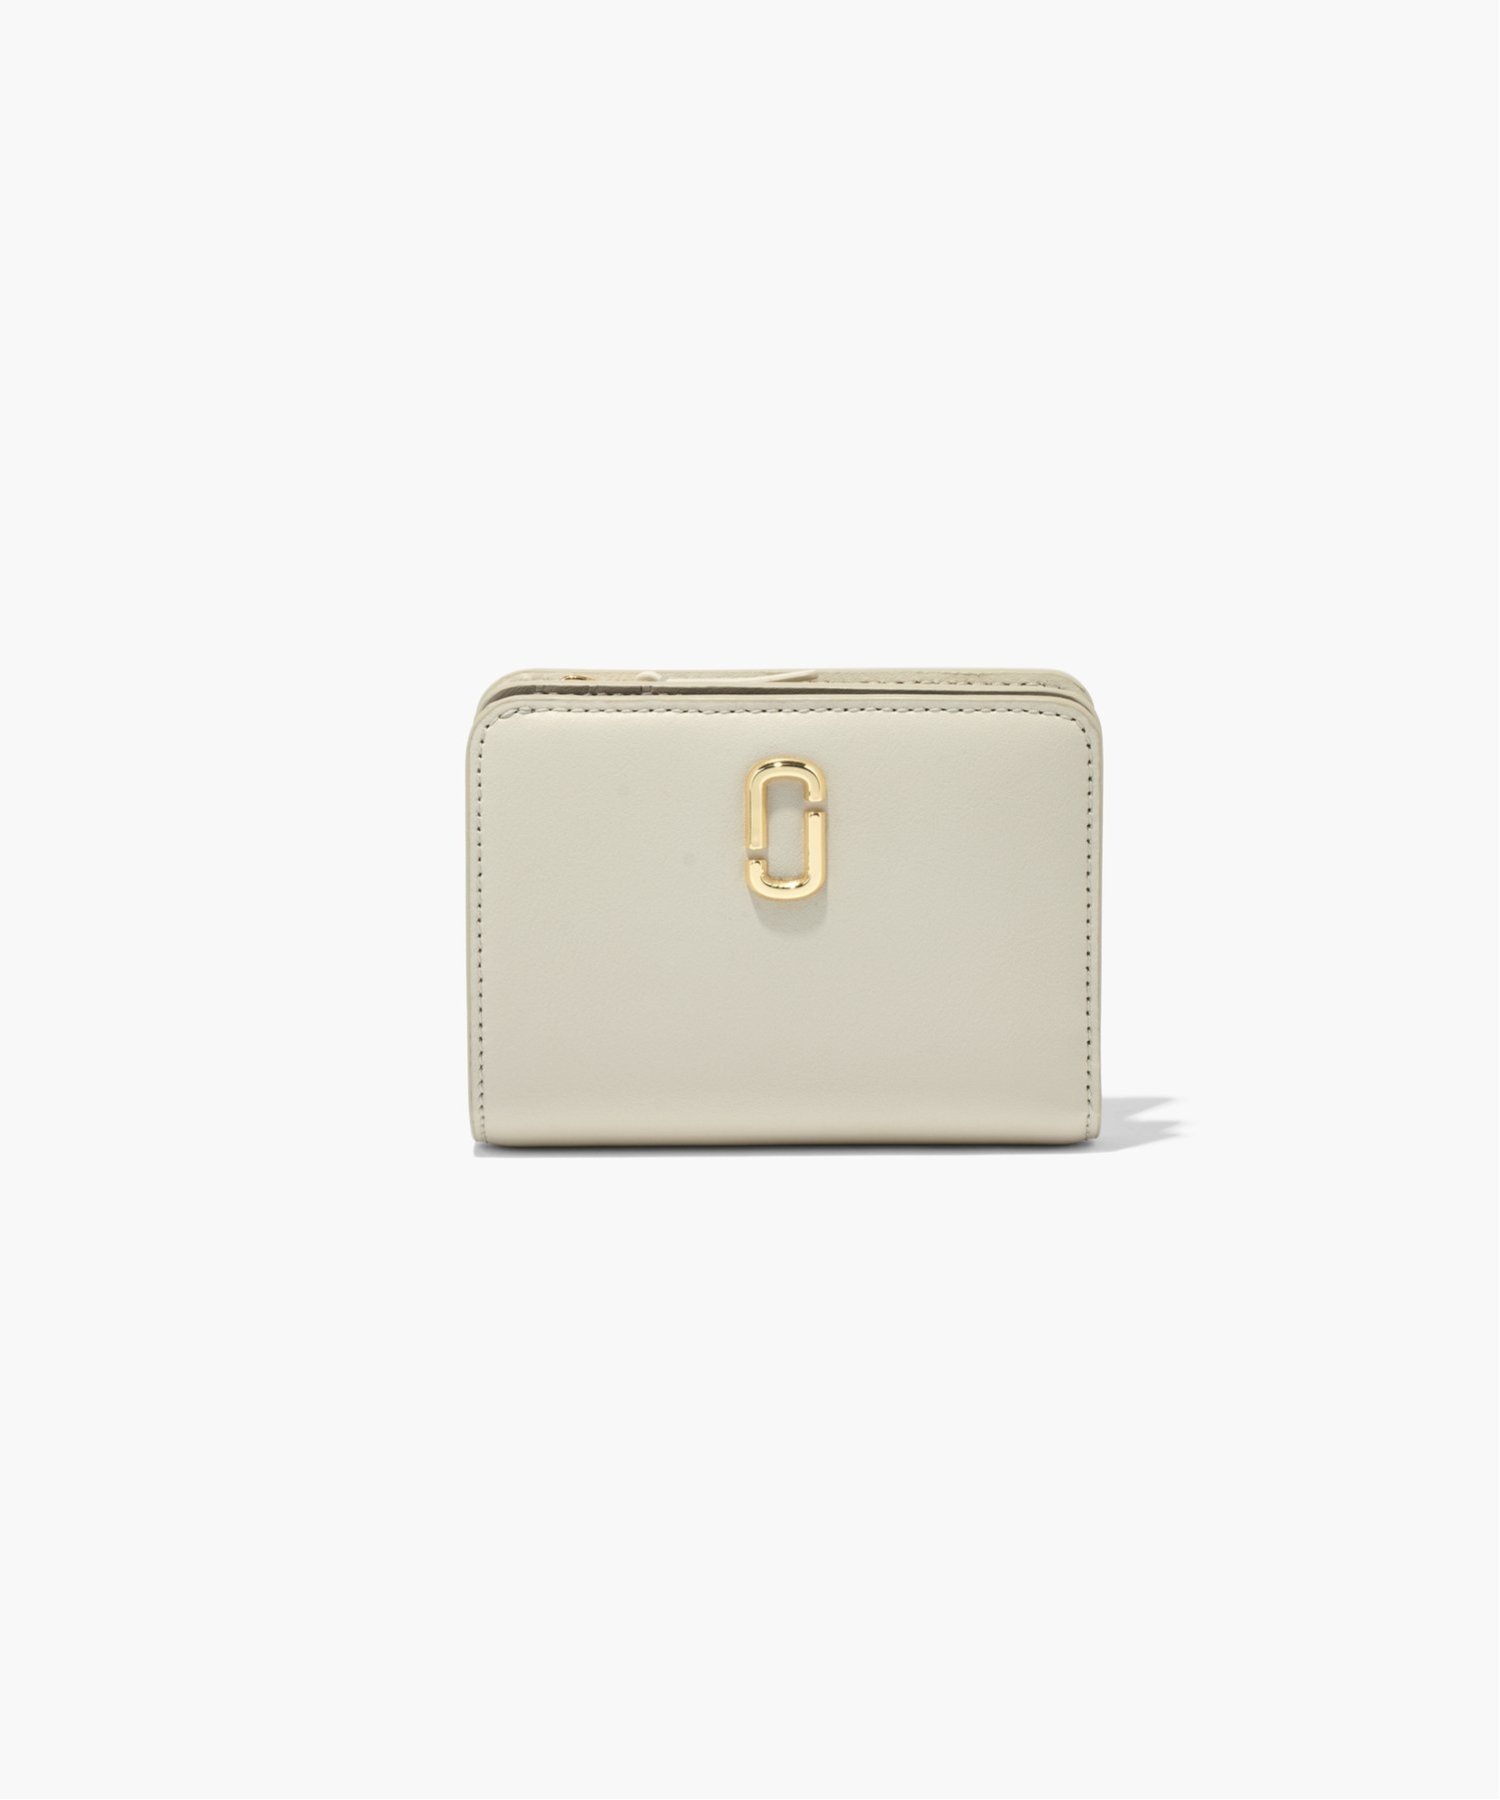 MARC JACOBS 【公式】THE J MARC MINI COMPACT WALLET/ザ Jマーク ミニ コンパクト ウォレット マーク ジェイコブス 財布 ポーチ ケース 財布 ホワイト【送料無料】